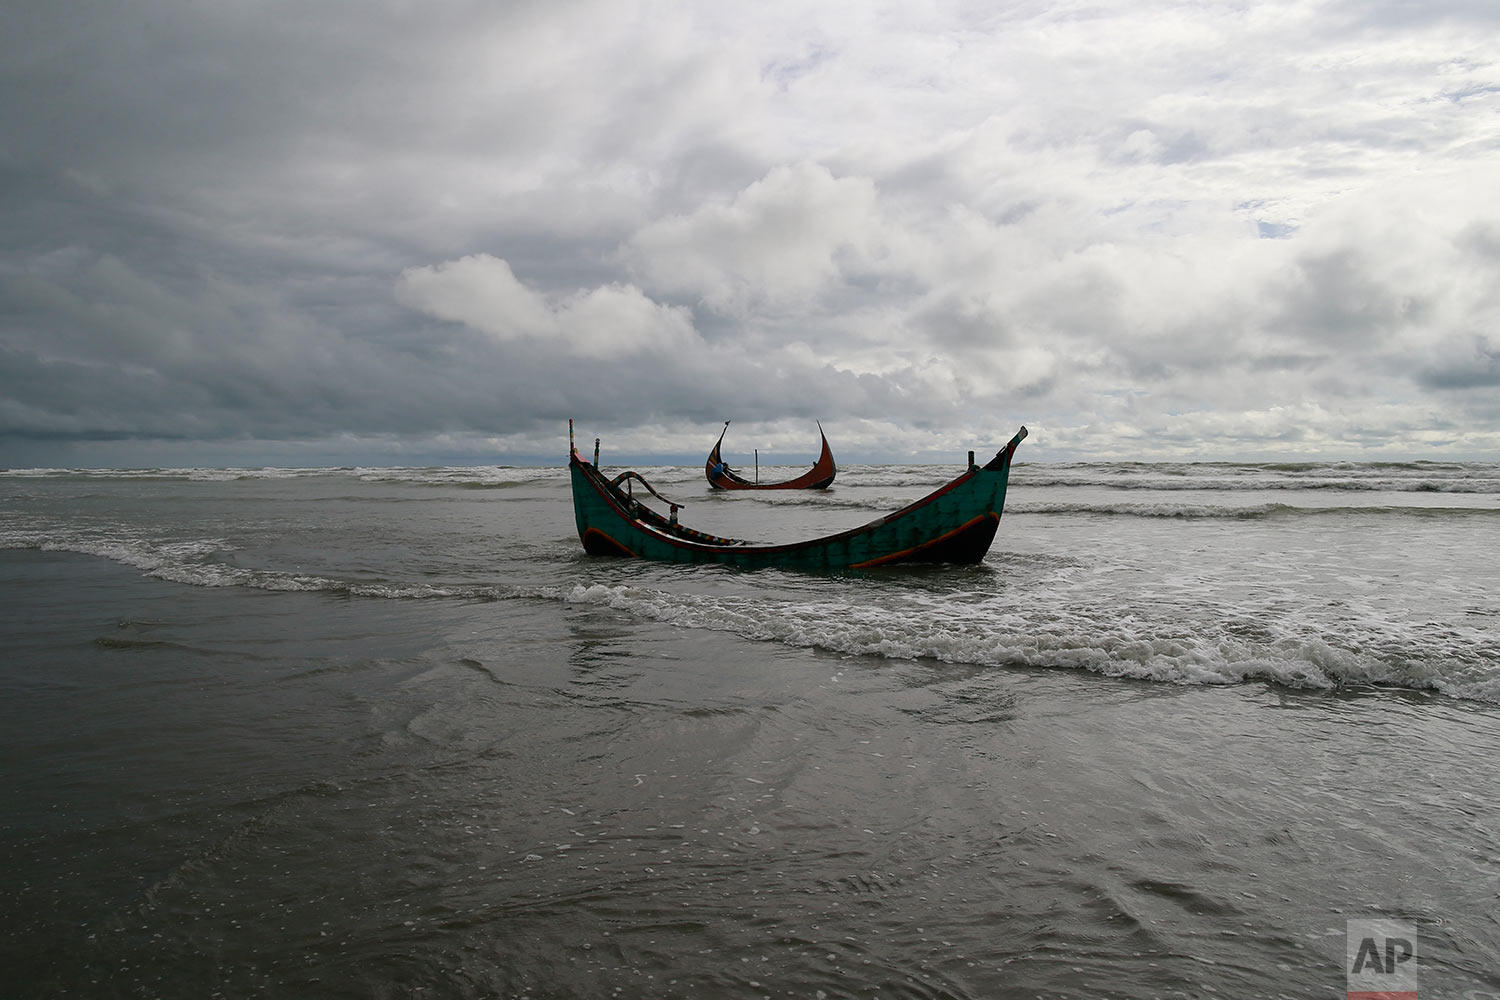 Two among three boats that capsized while being used by fleeing Rohingya is seen on the Bay of Bengal coast, after being recovered by Bangladeshi villagers at Shah Porir Deep, in Teknak, Bangladesh, Thursday, Aug.31, 2017. Three boats carrying ethnic Rohingya fleeing violence in Myanmar have capsized in Bangladesh and 26 bodies of women and children have been recovered, officials said Thursday. Last week, a group of ethnic minority Rohingya insurgents attacked at least two dozen police posts in Myanmar's Rakhine state, triggering fighting with security forces that left more than 100 people dead and forced at least 18,000 Rohingya to flee into neighboring Bangladesh. (AP Photo/Suvra Kanti Das)